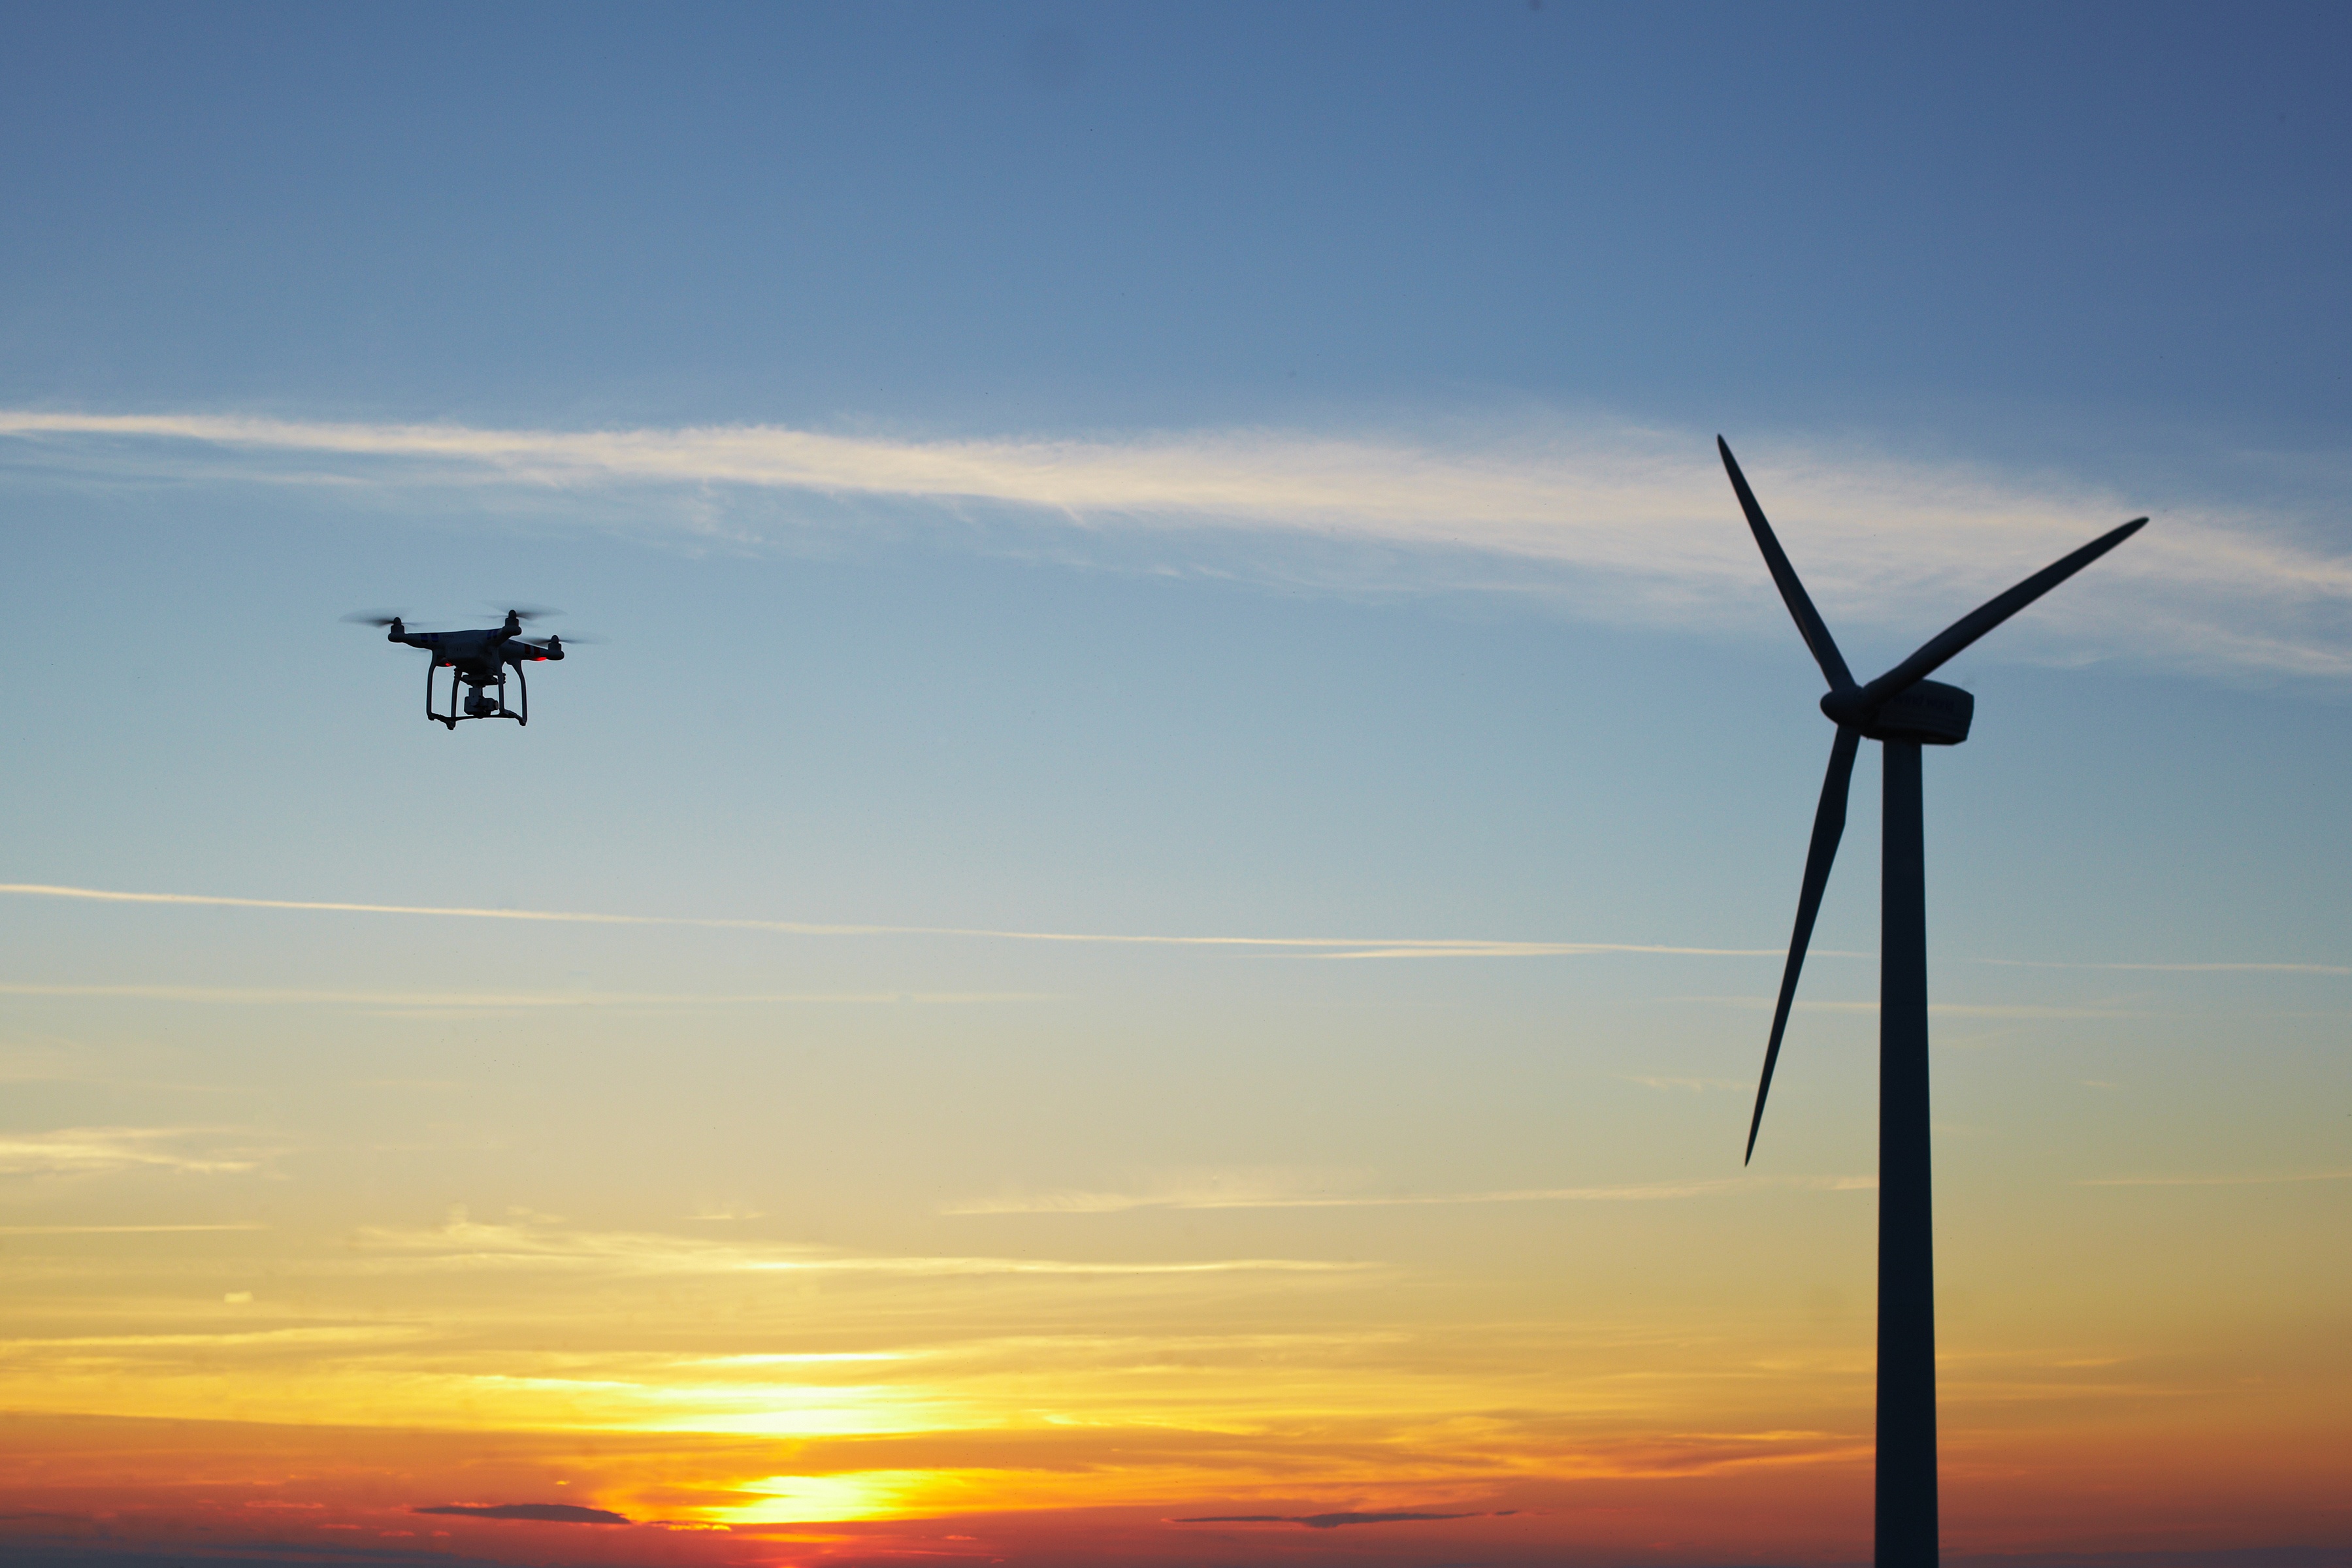 Turbine Drone Set to a Dollar Industry